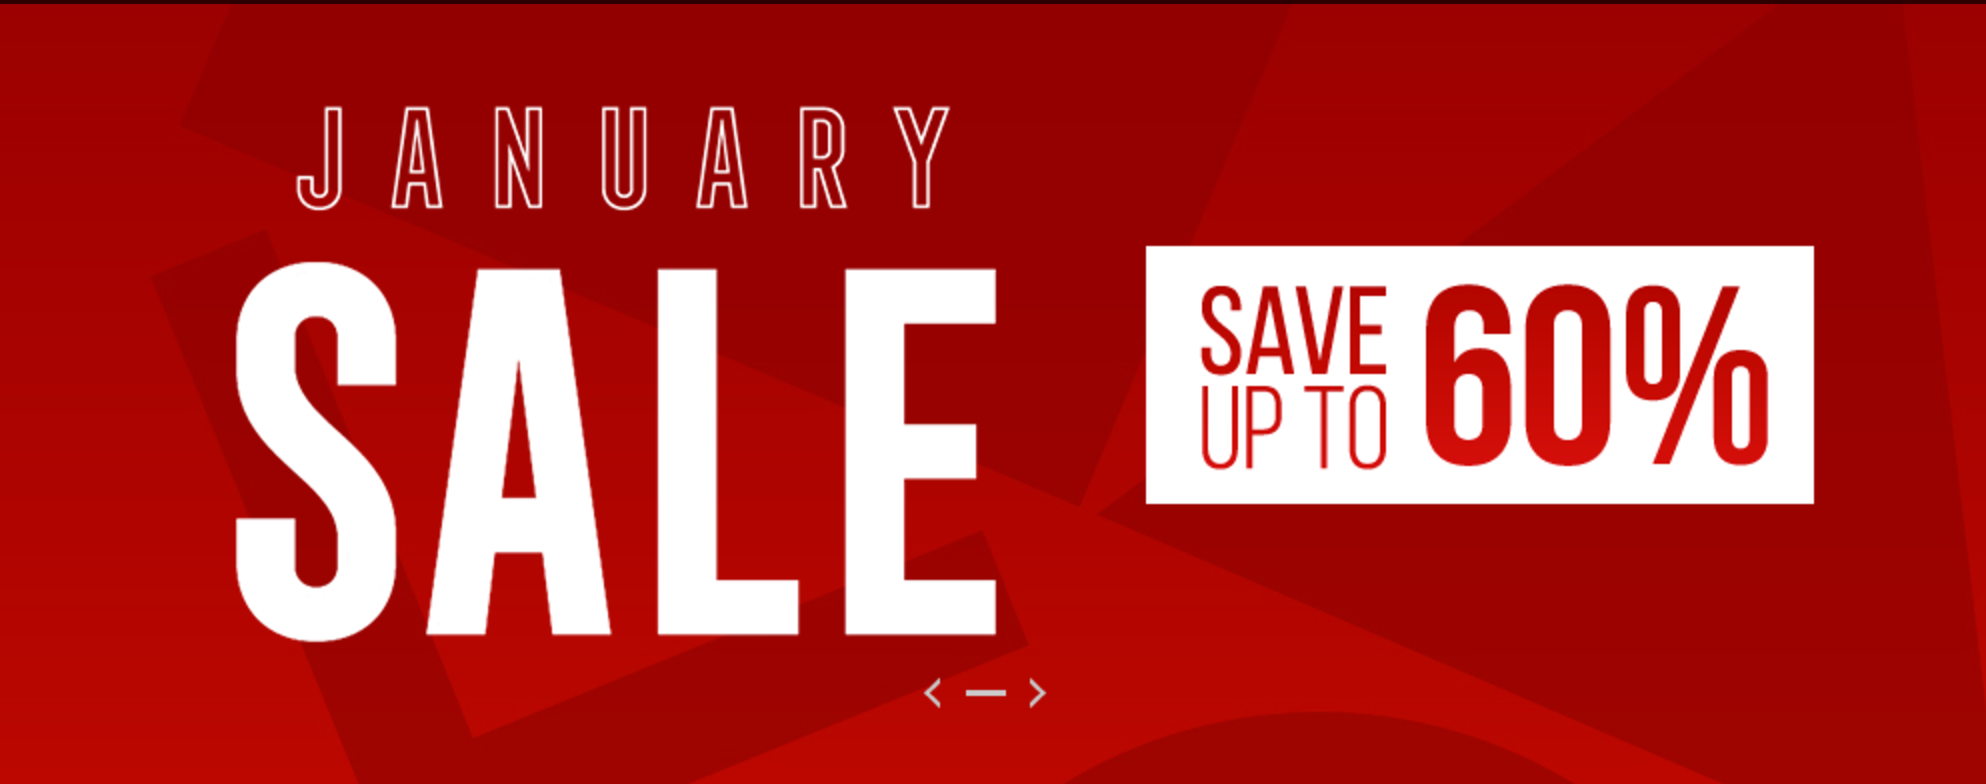 January sale PS Store. December sale. Bargain sale. Sale up to 60. The january sales started and when